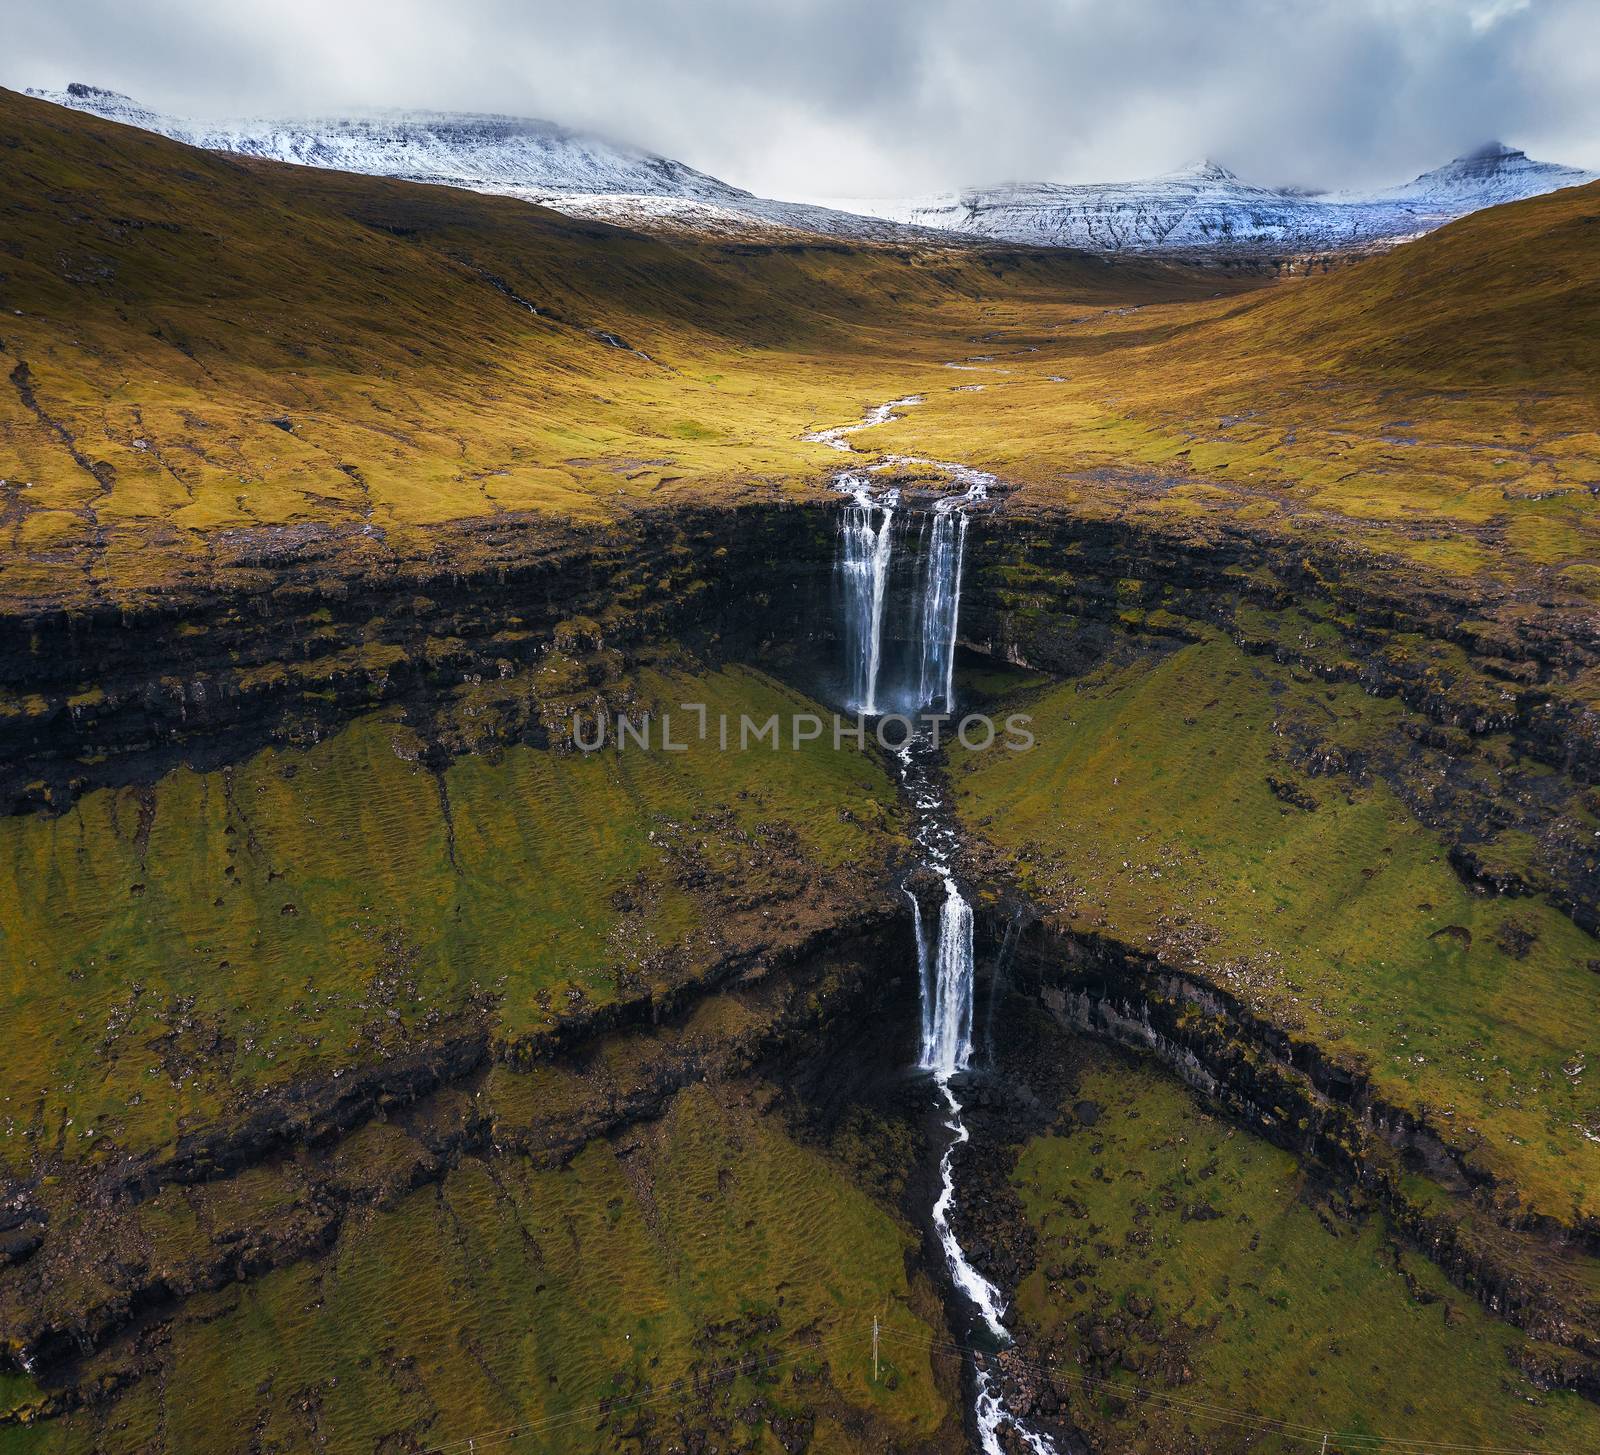 Aerial view of the Fossa Waterfall on Bordoy island with snow covered mountains in the background. This is the highest waterfall in the Faroe Islands, situated in wild scandinavian scenery.